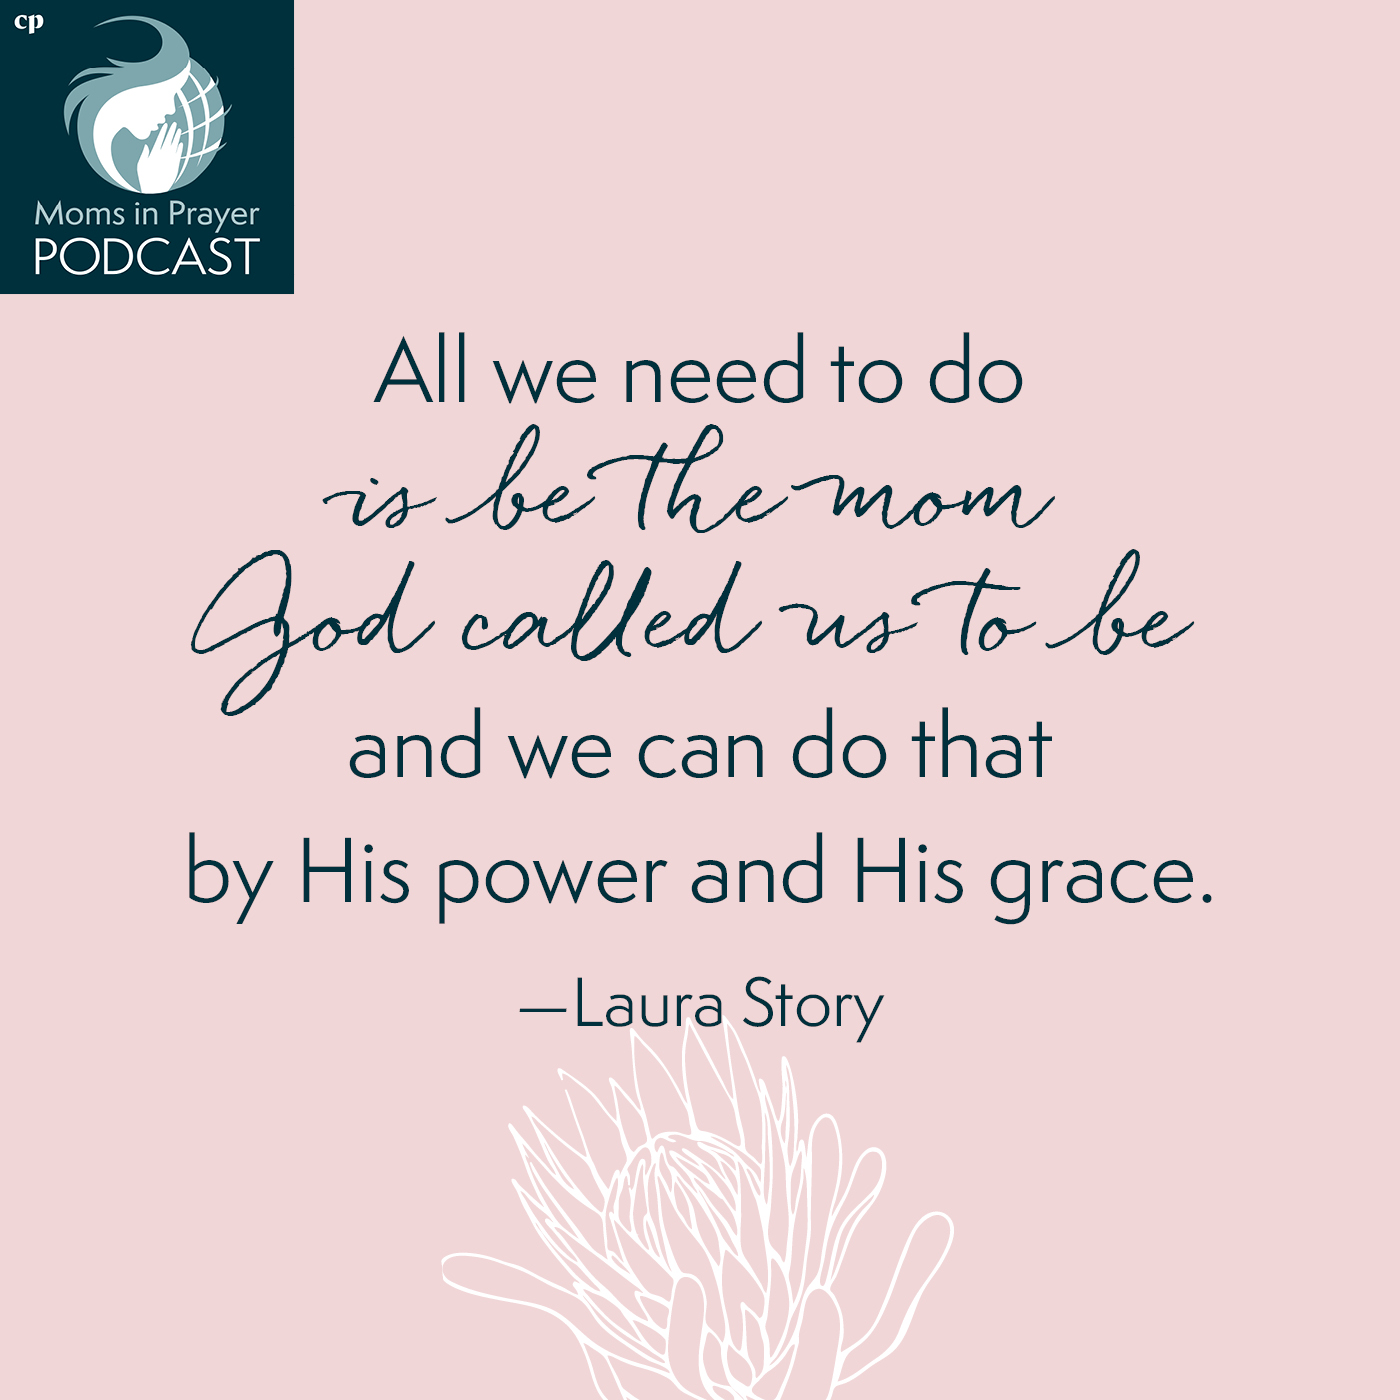 Being the mom God called me to be, Laura Story